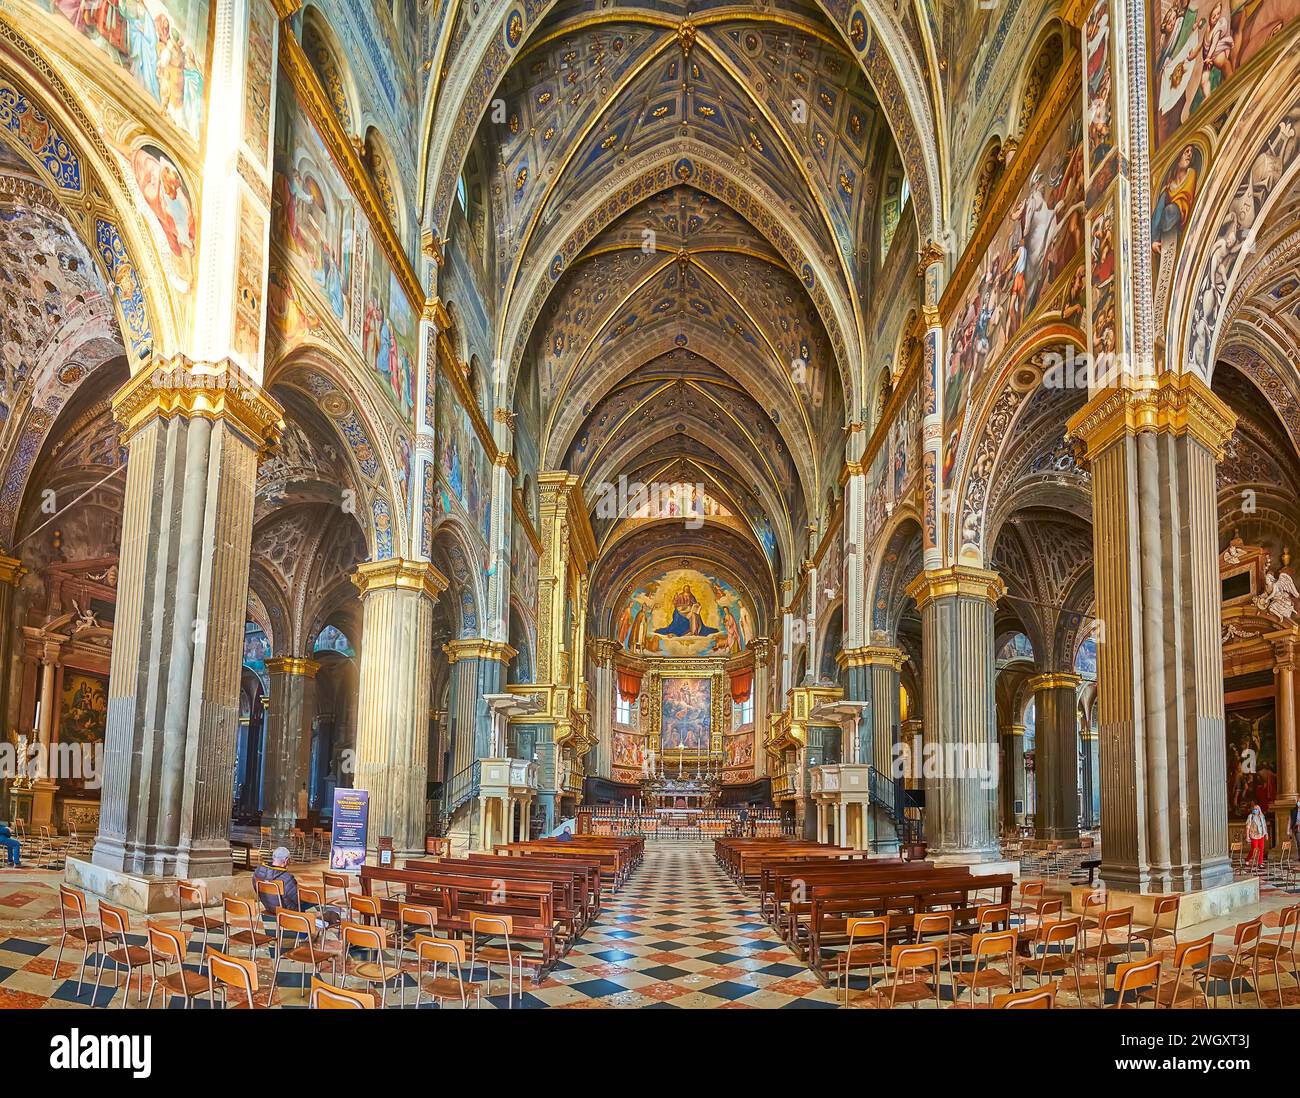 CREMONA, ITALY - APRIL 6, 2022: Panoramic interior of Santa Maria Assunta Cathedral with rich decorations, tall columns and picturesque altar, Lombard Stock Photo